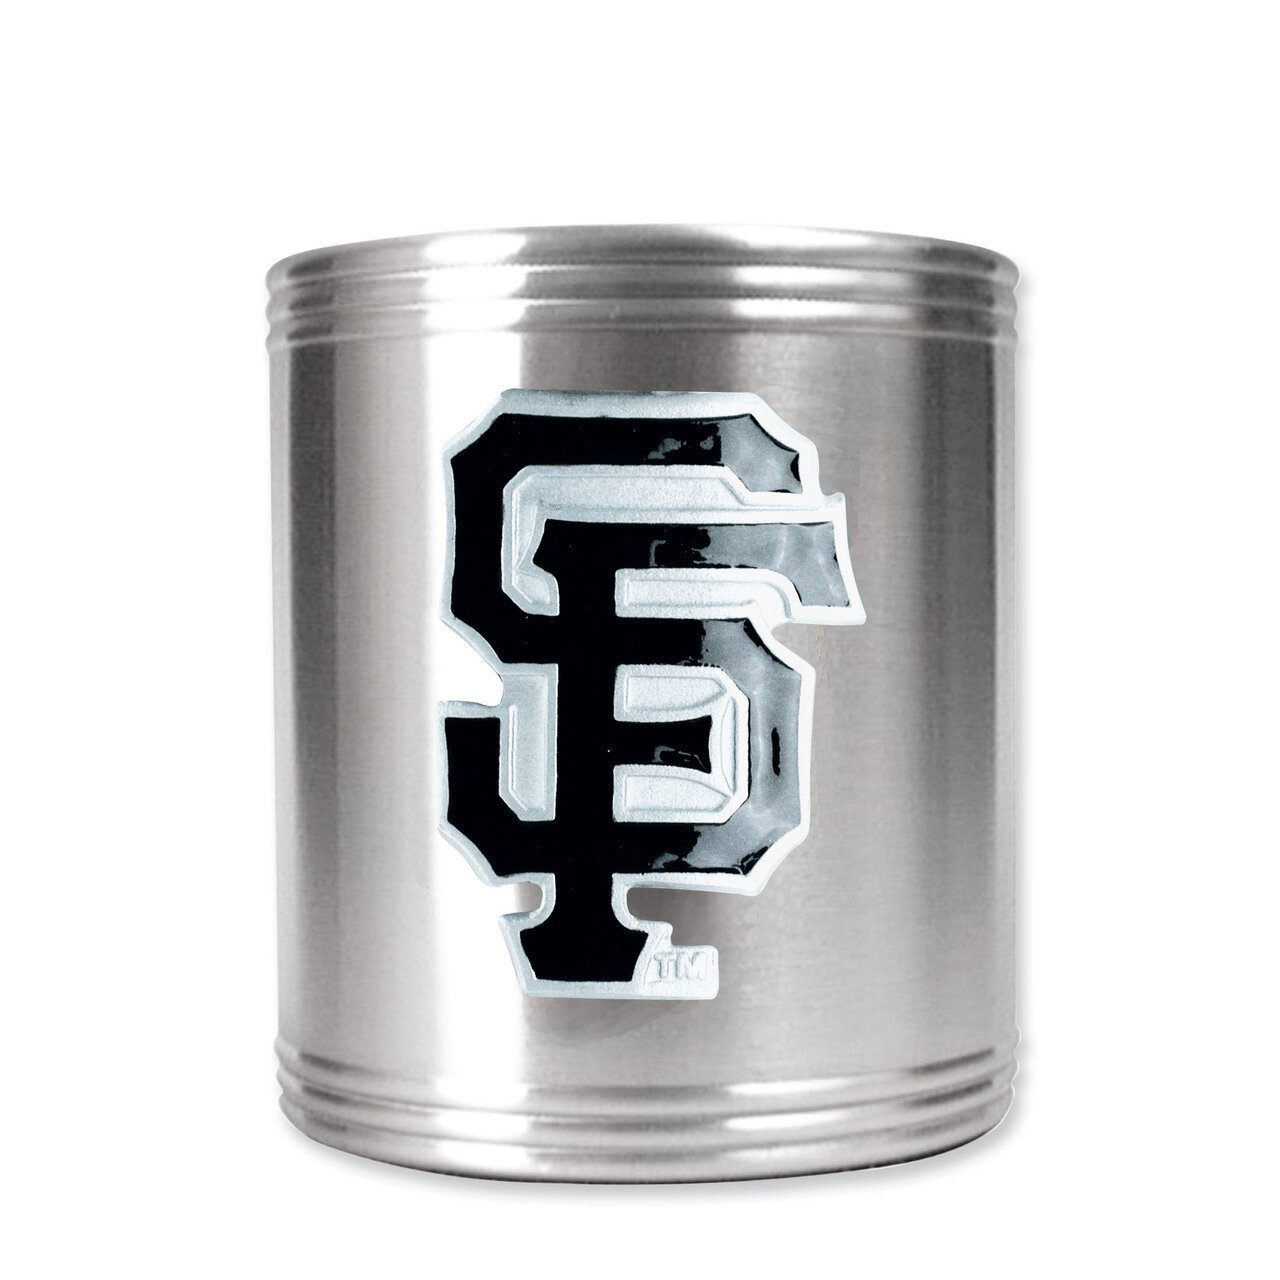 San Francisco Giants Insulated Stainless Steel Holder GC833